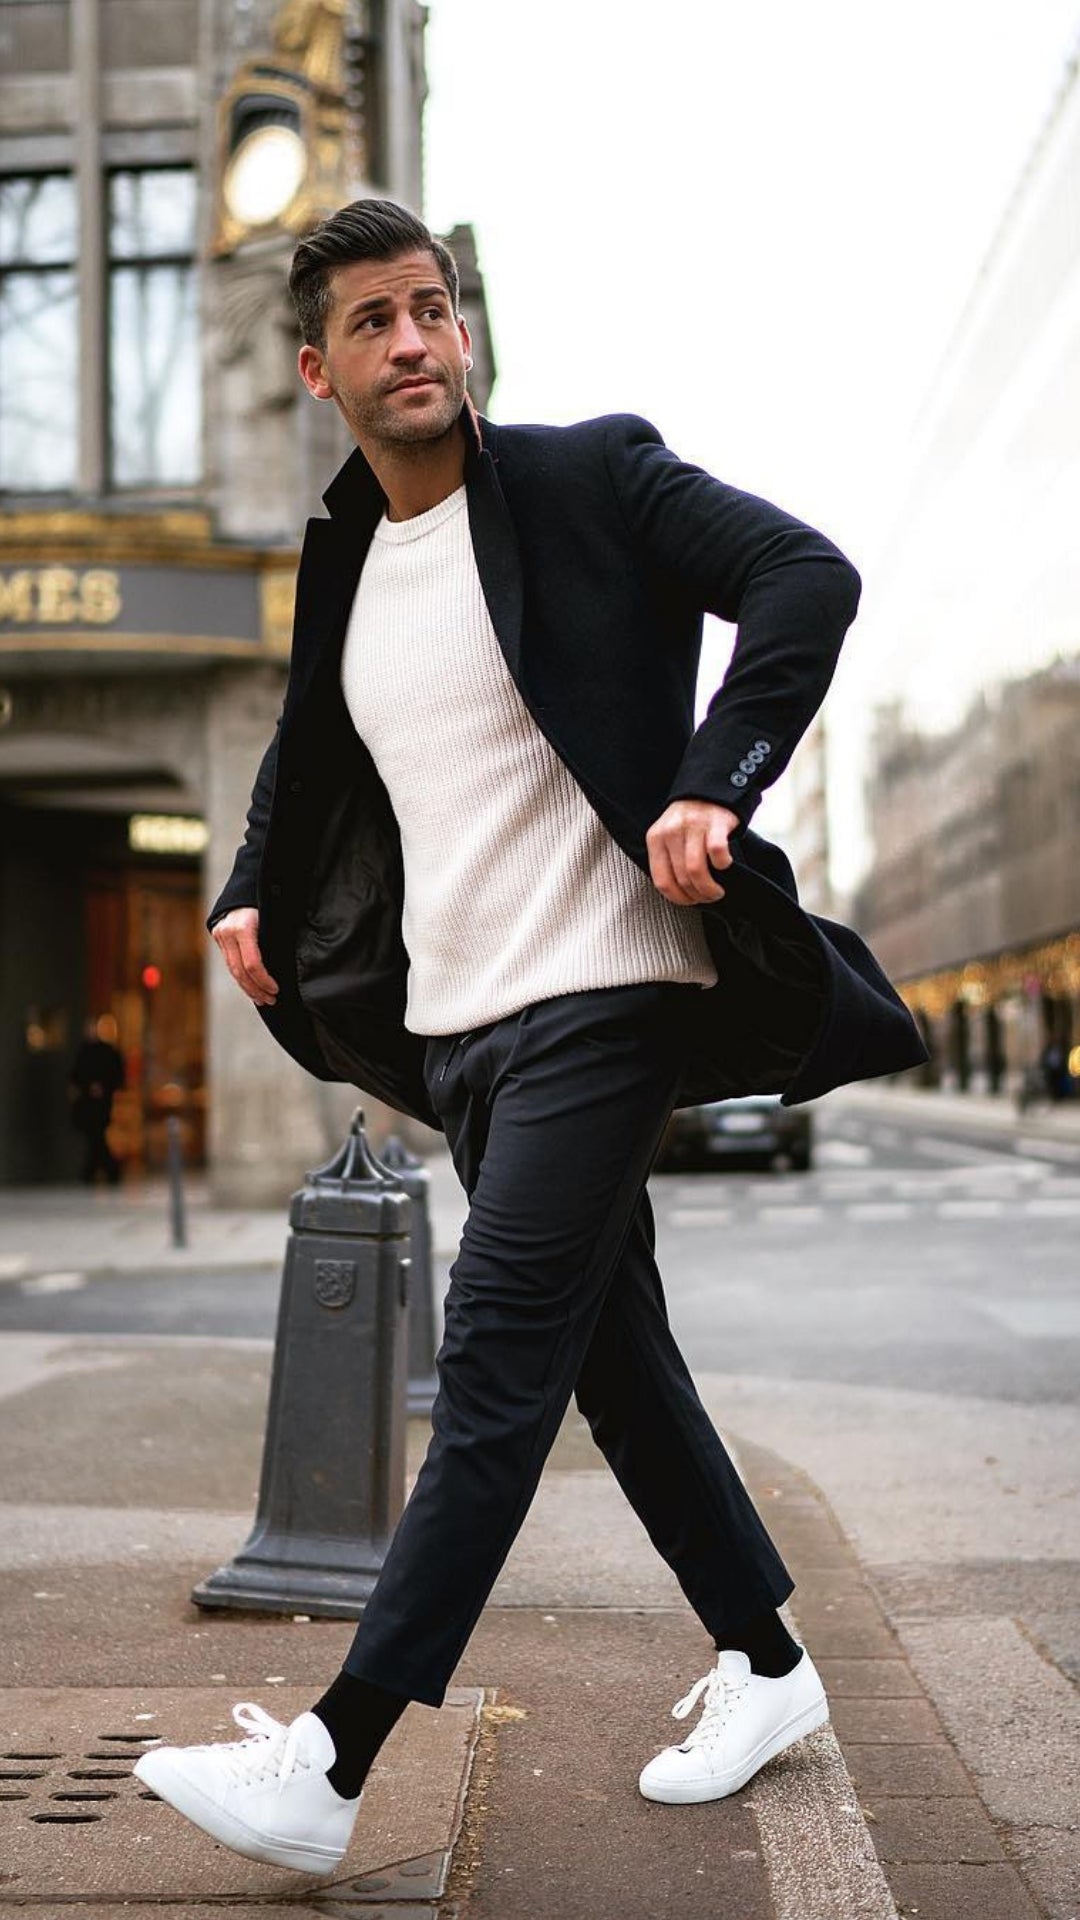 Want To Dress Sharp? Copy This Guy. #mensfashion #casual #outfits # ...